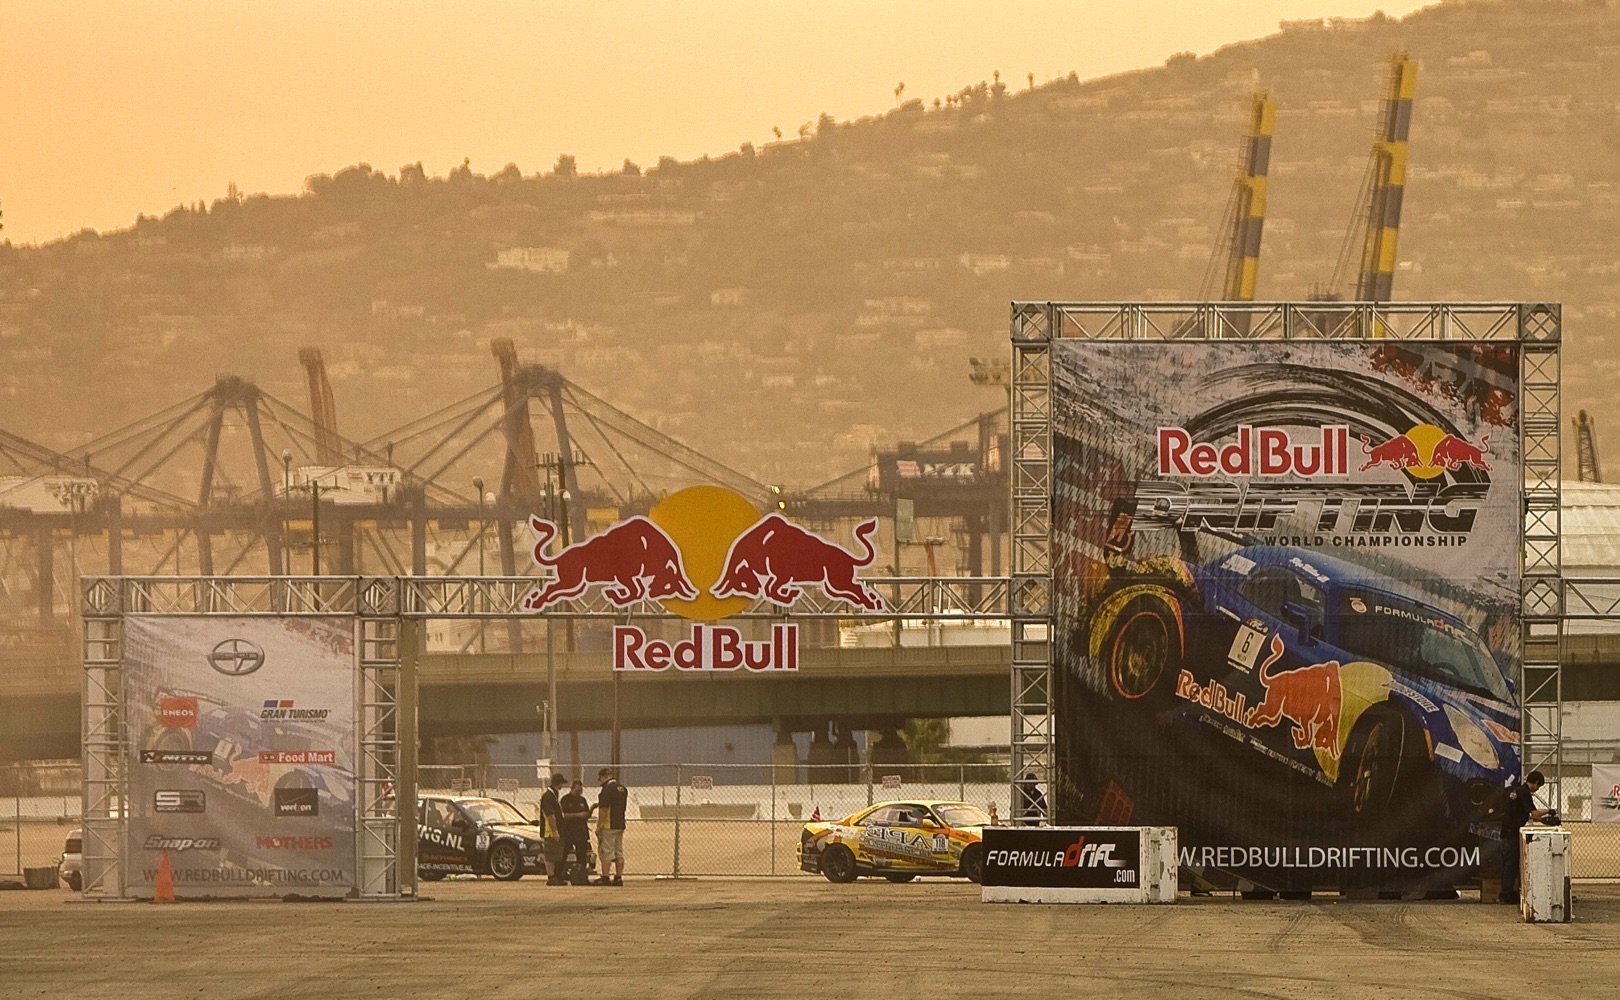 redbull drifting branding outdoor event promotional signage 6